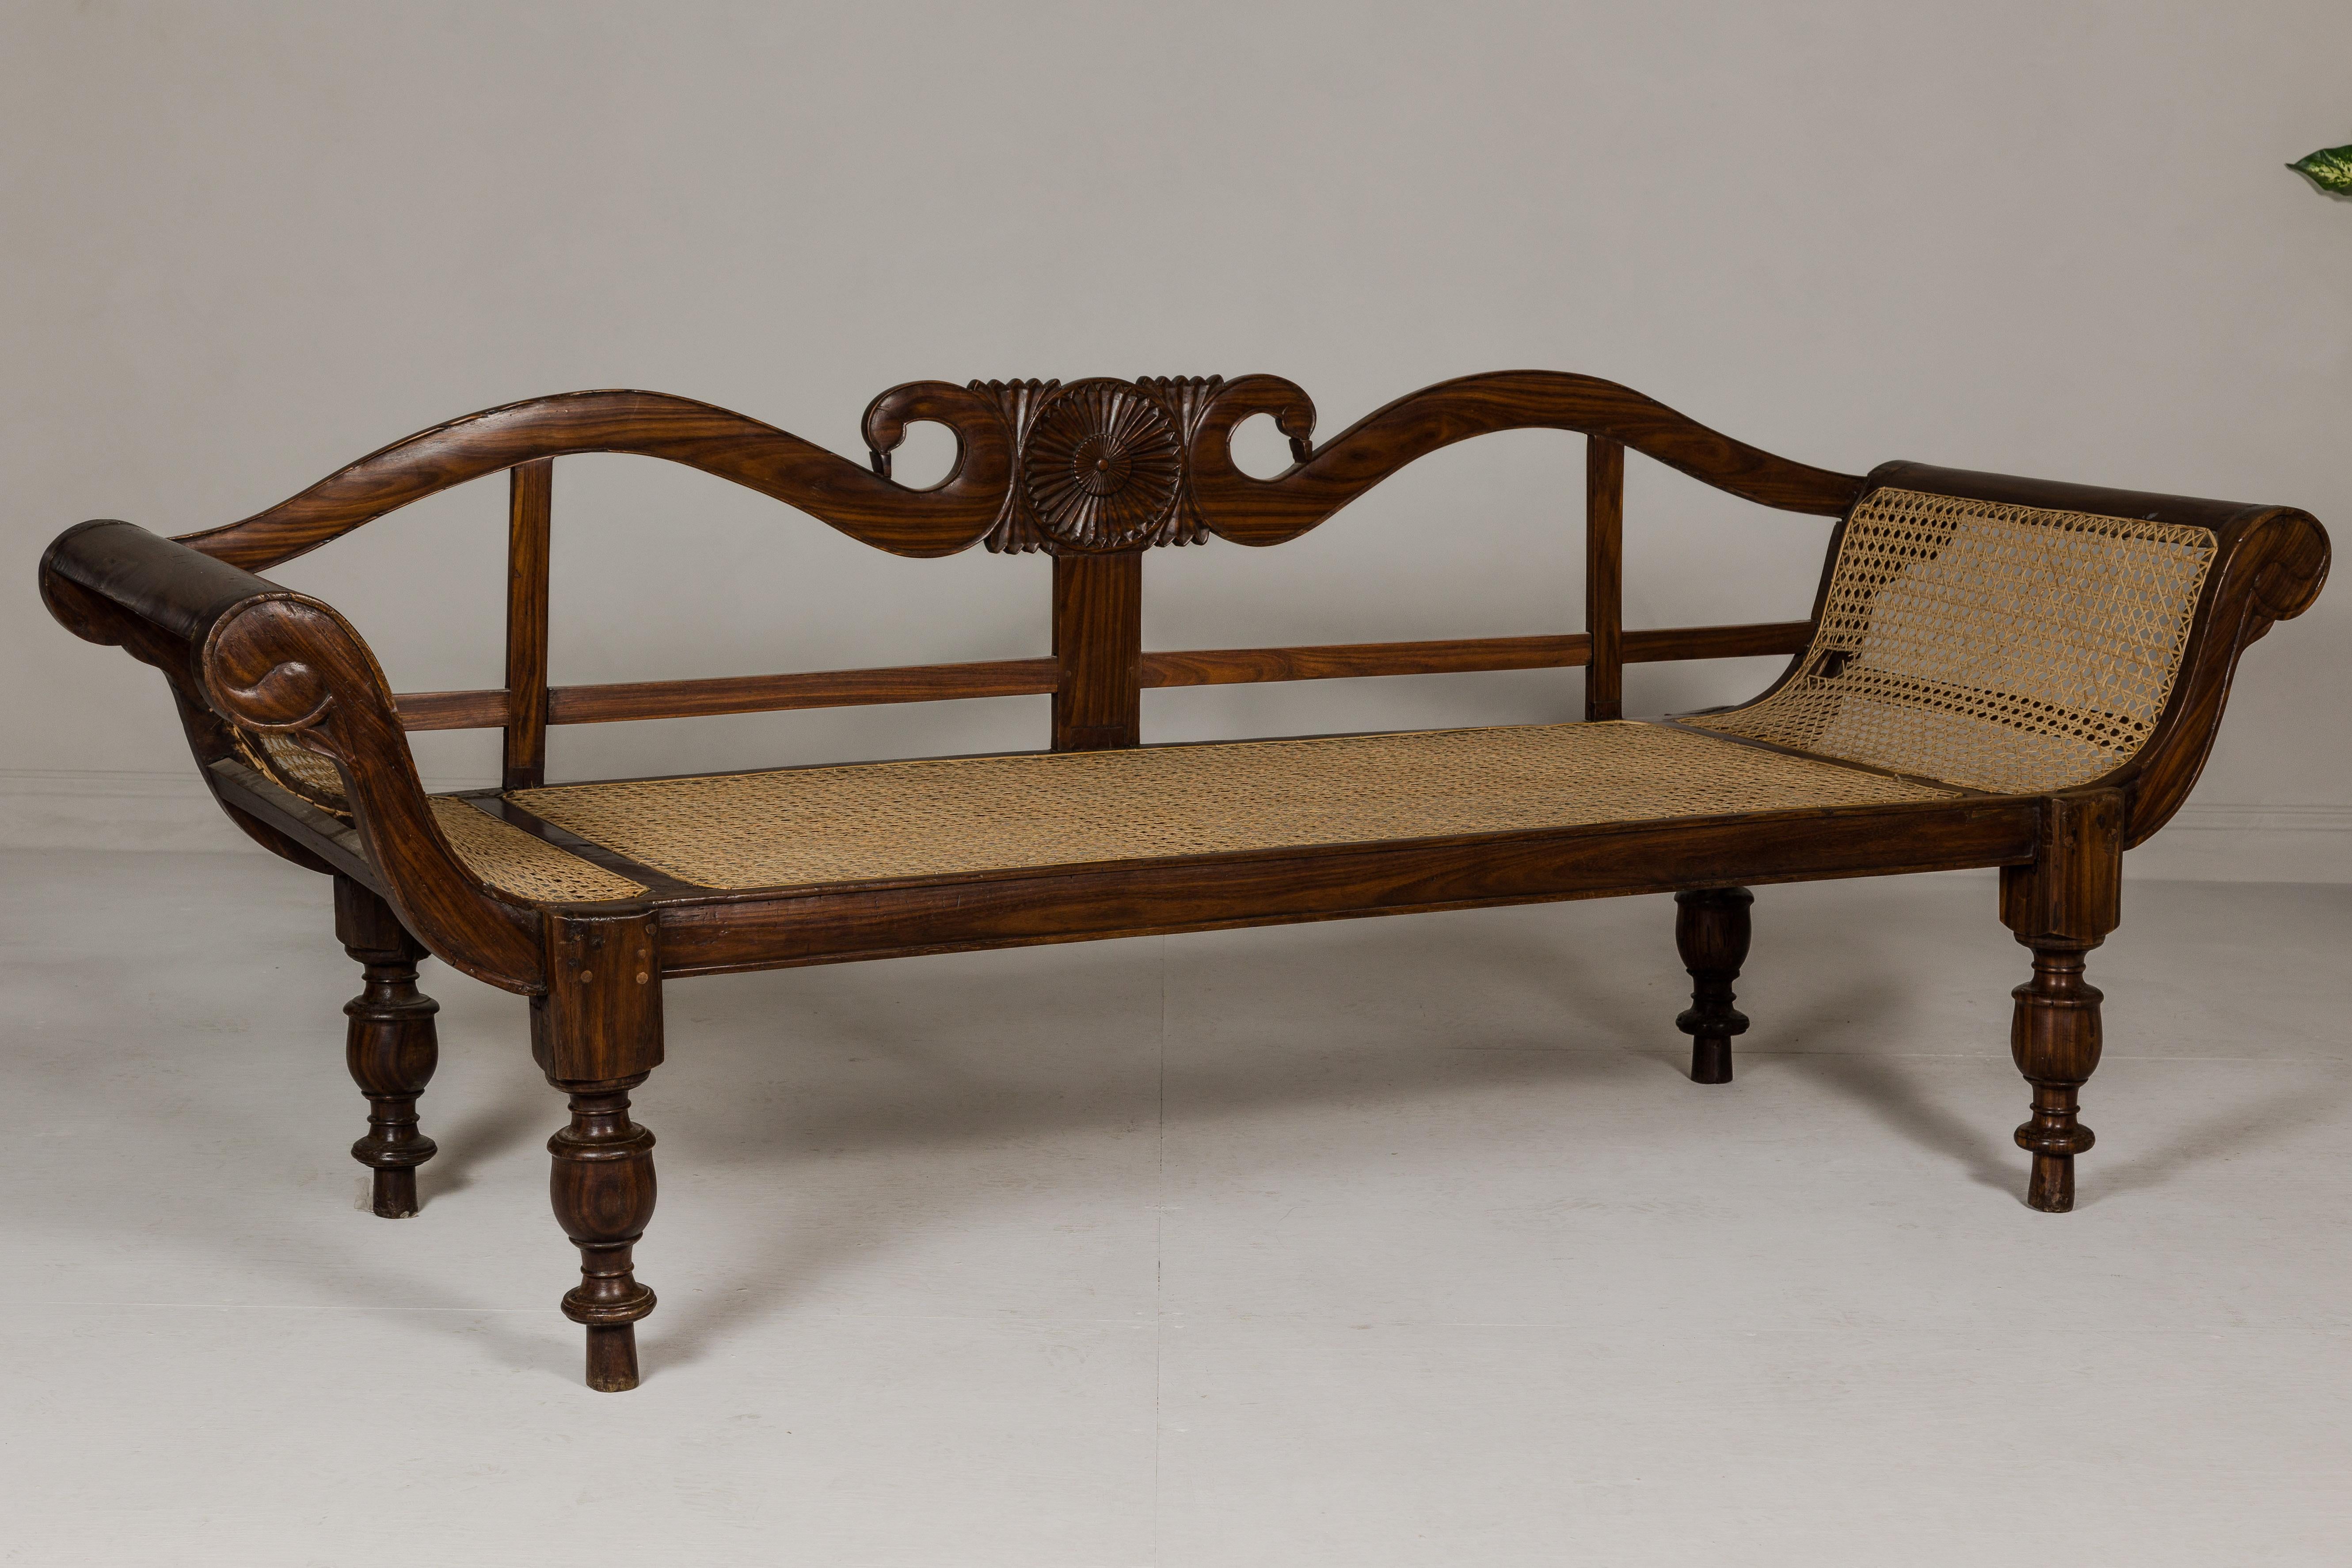 British Colonial Carved and Cane Settee with Swan Neck Back and Scrolling Arms For Sale 4